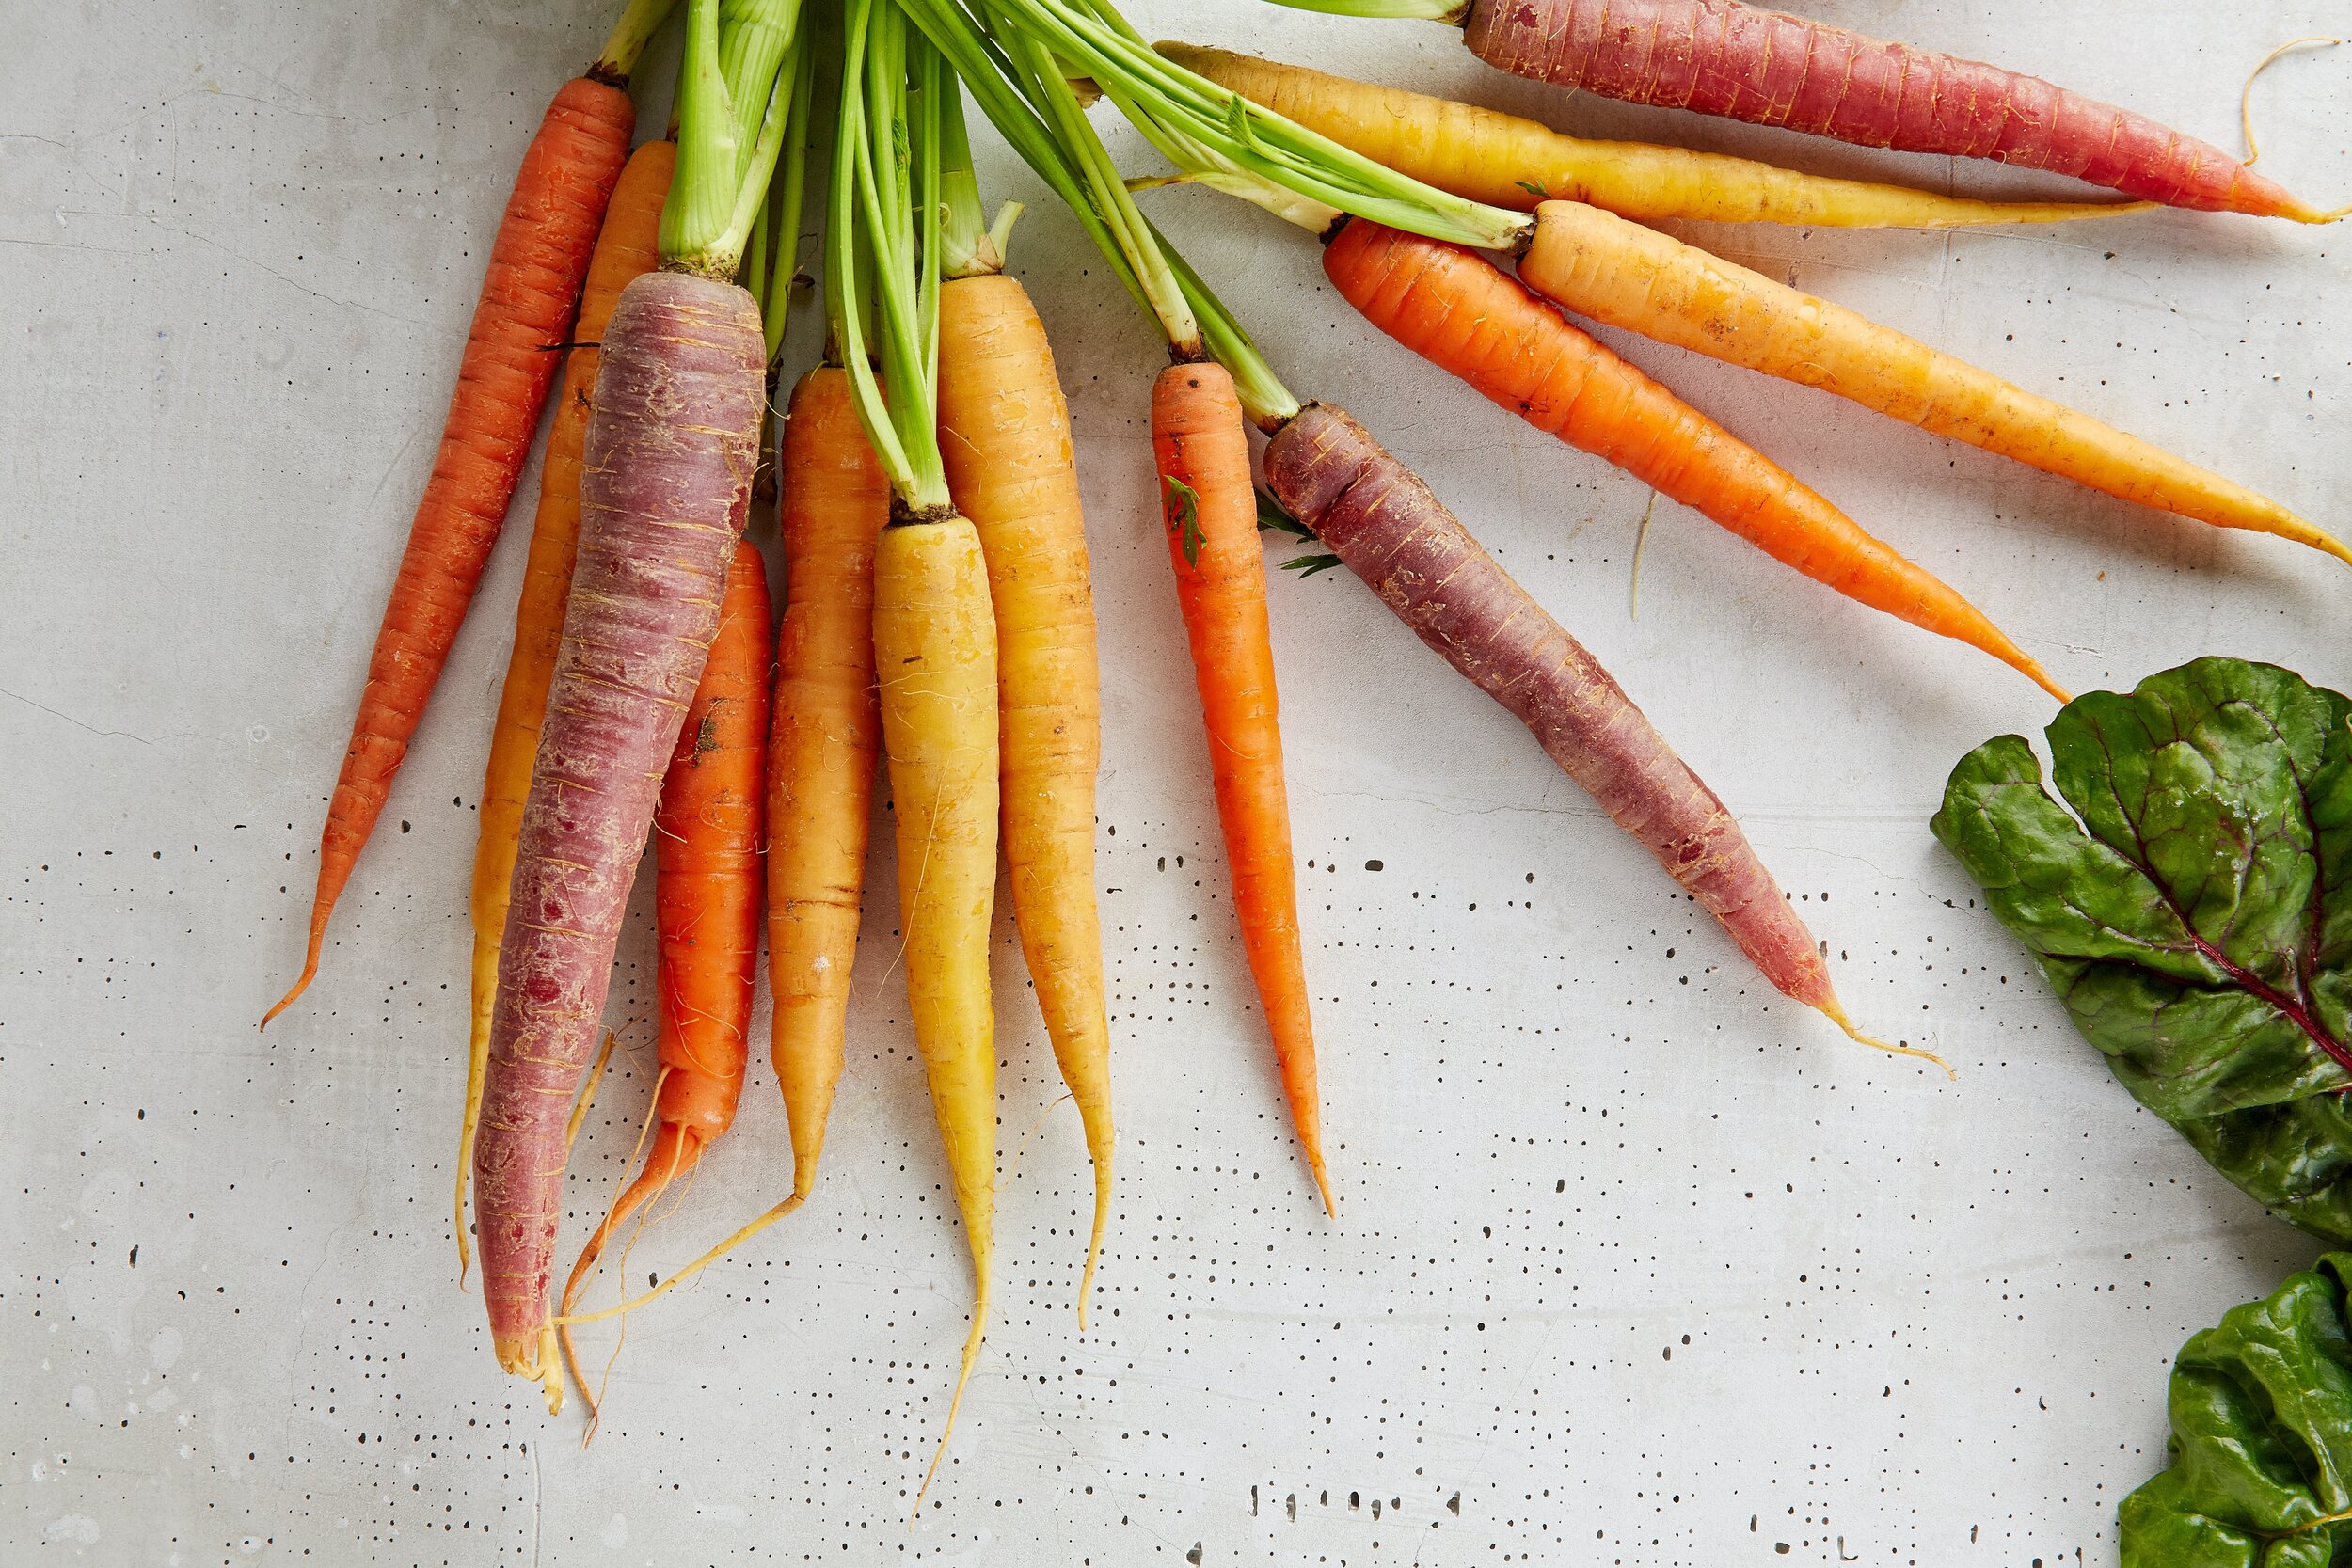 Carrots come in a variety of colors and sizes. Photo by Gabriel Gurrola